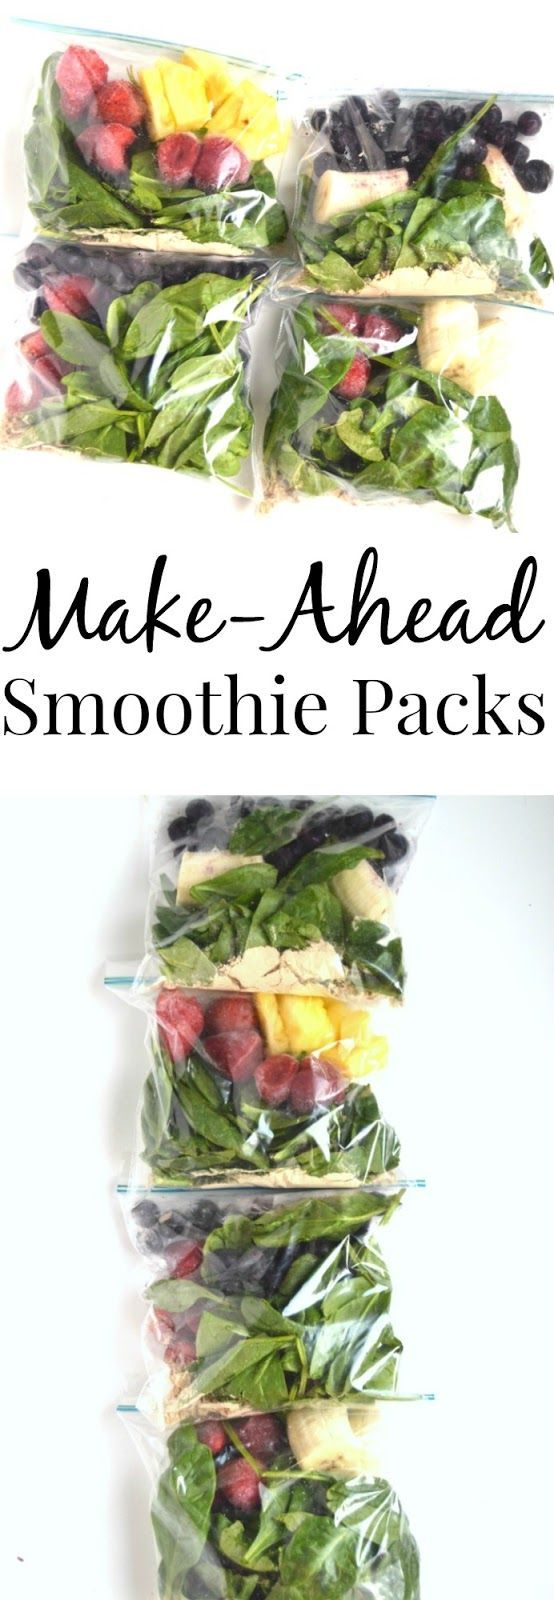 Four make-ahead smoothie pack combinations that are stored right in your freezer! Save time by making these freezer smoothie packs